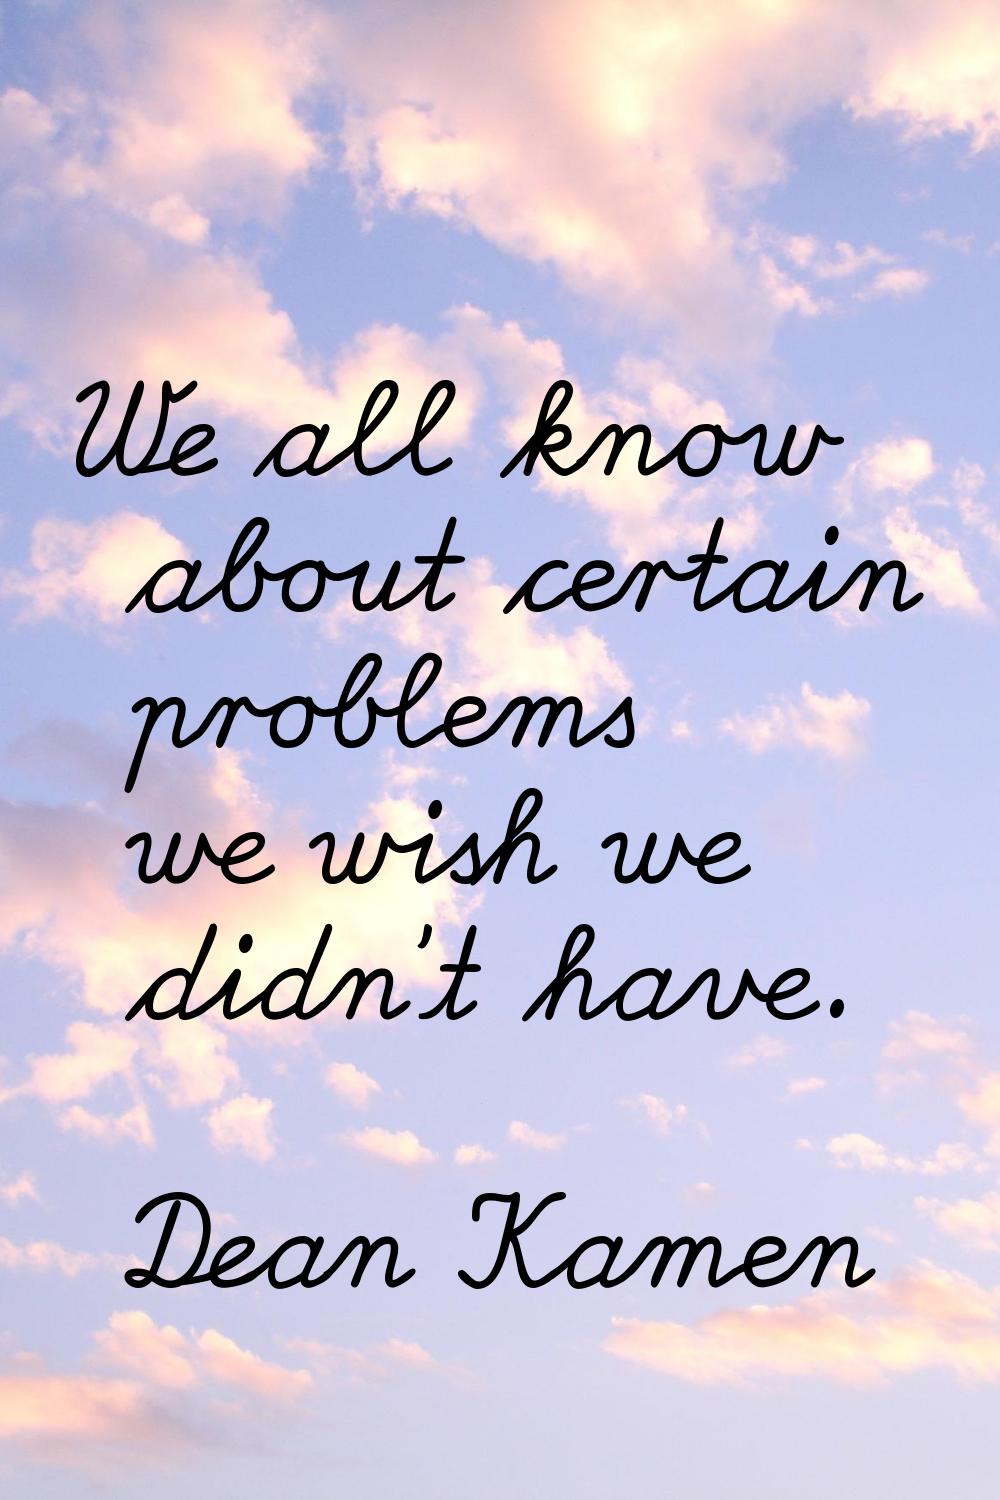 We all know about certain problems we wish we didn't have.